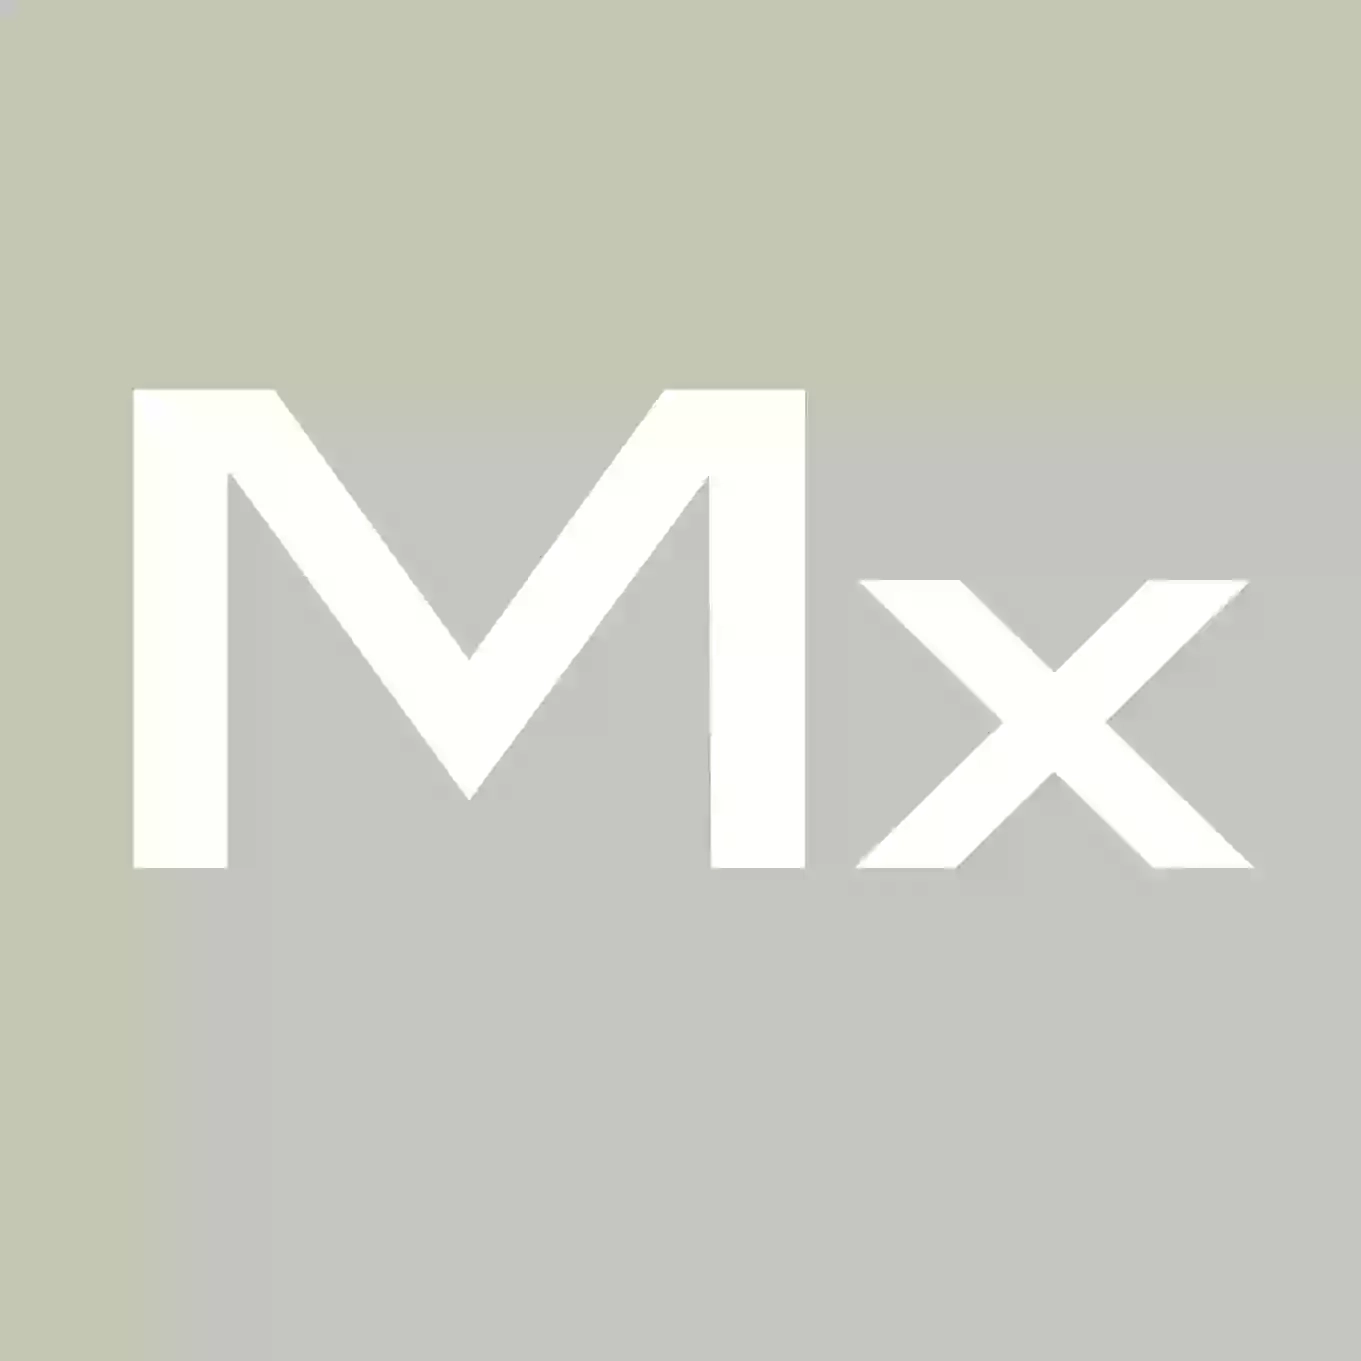 Mx - Best Haircuts in Manchester | Hair Salon, Barbers